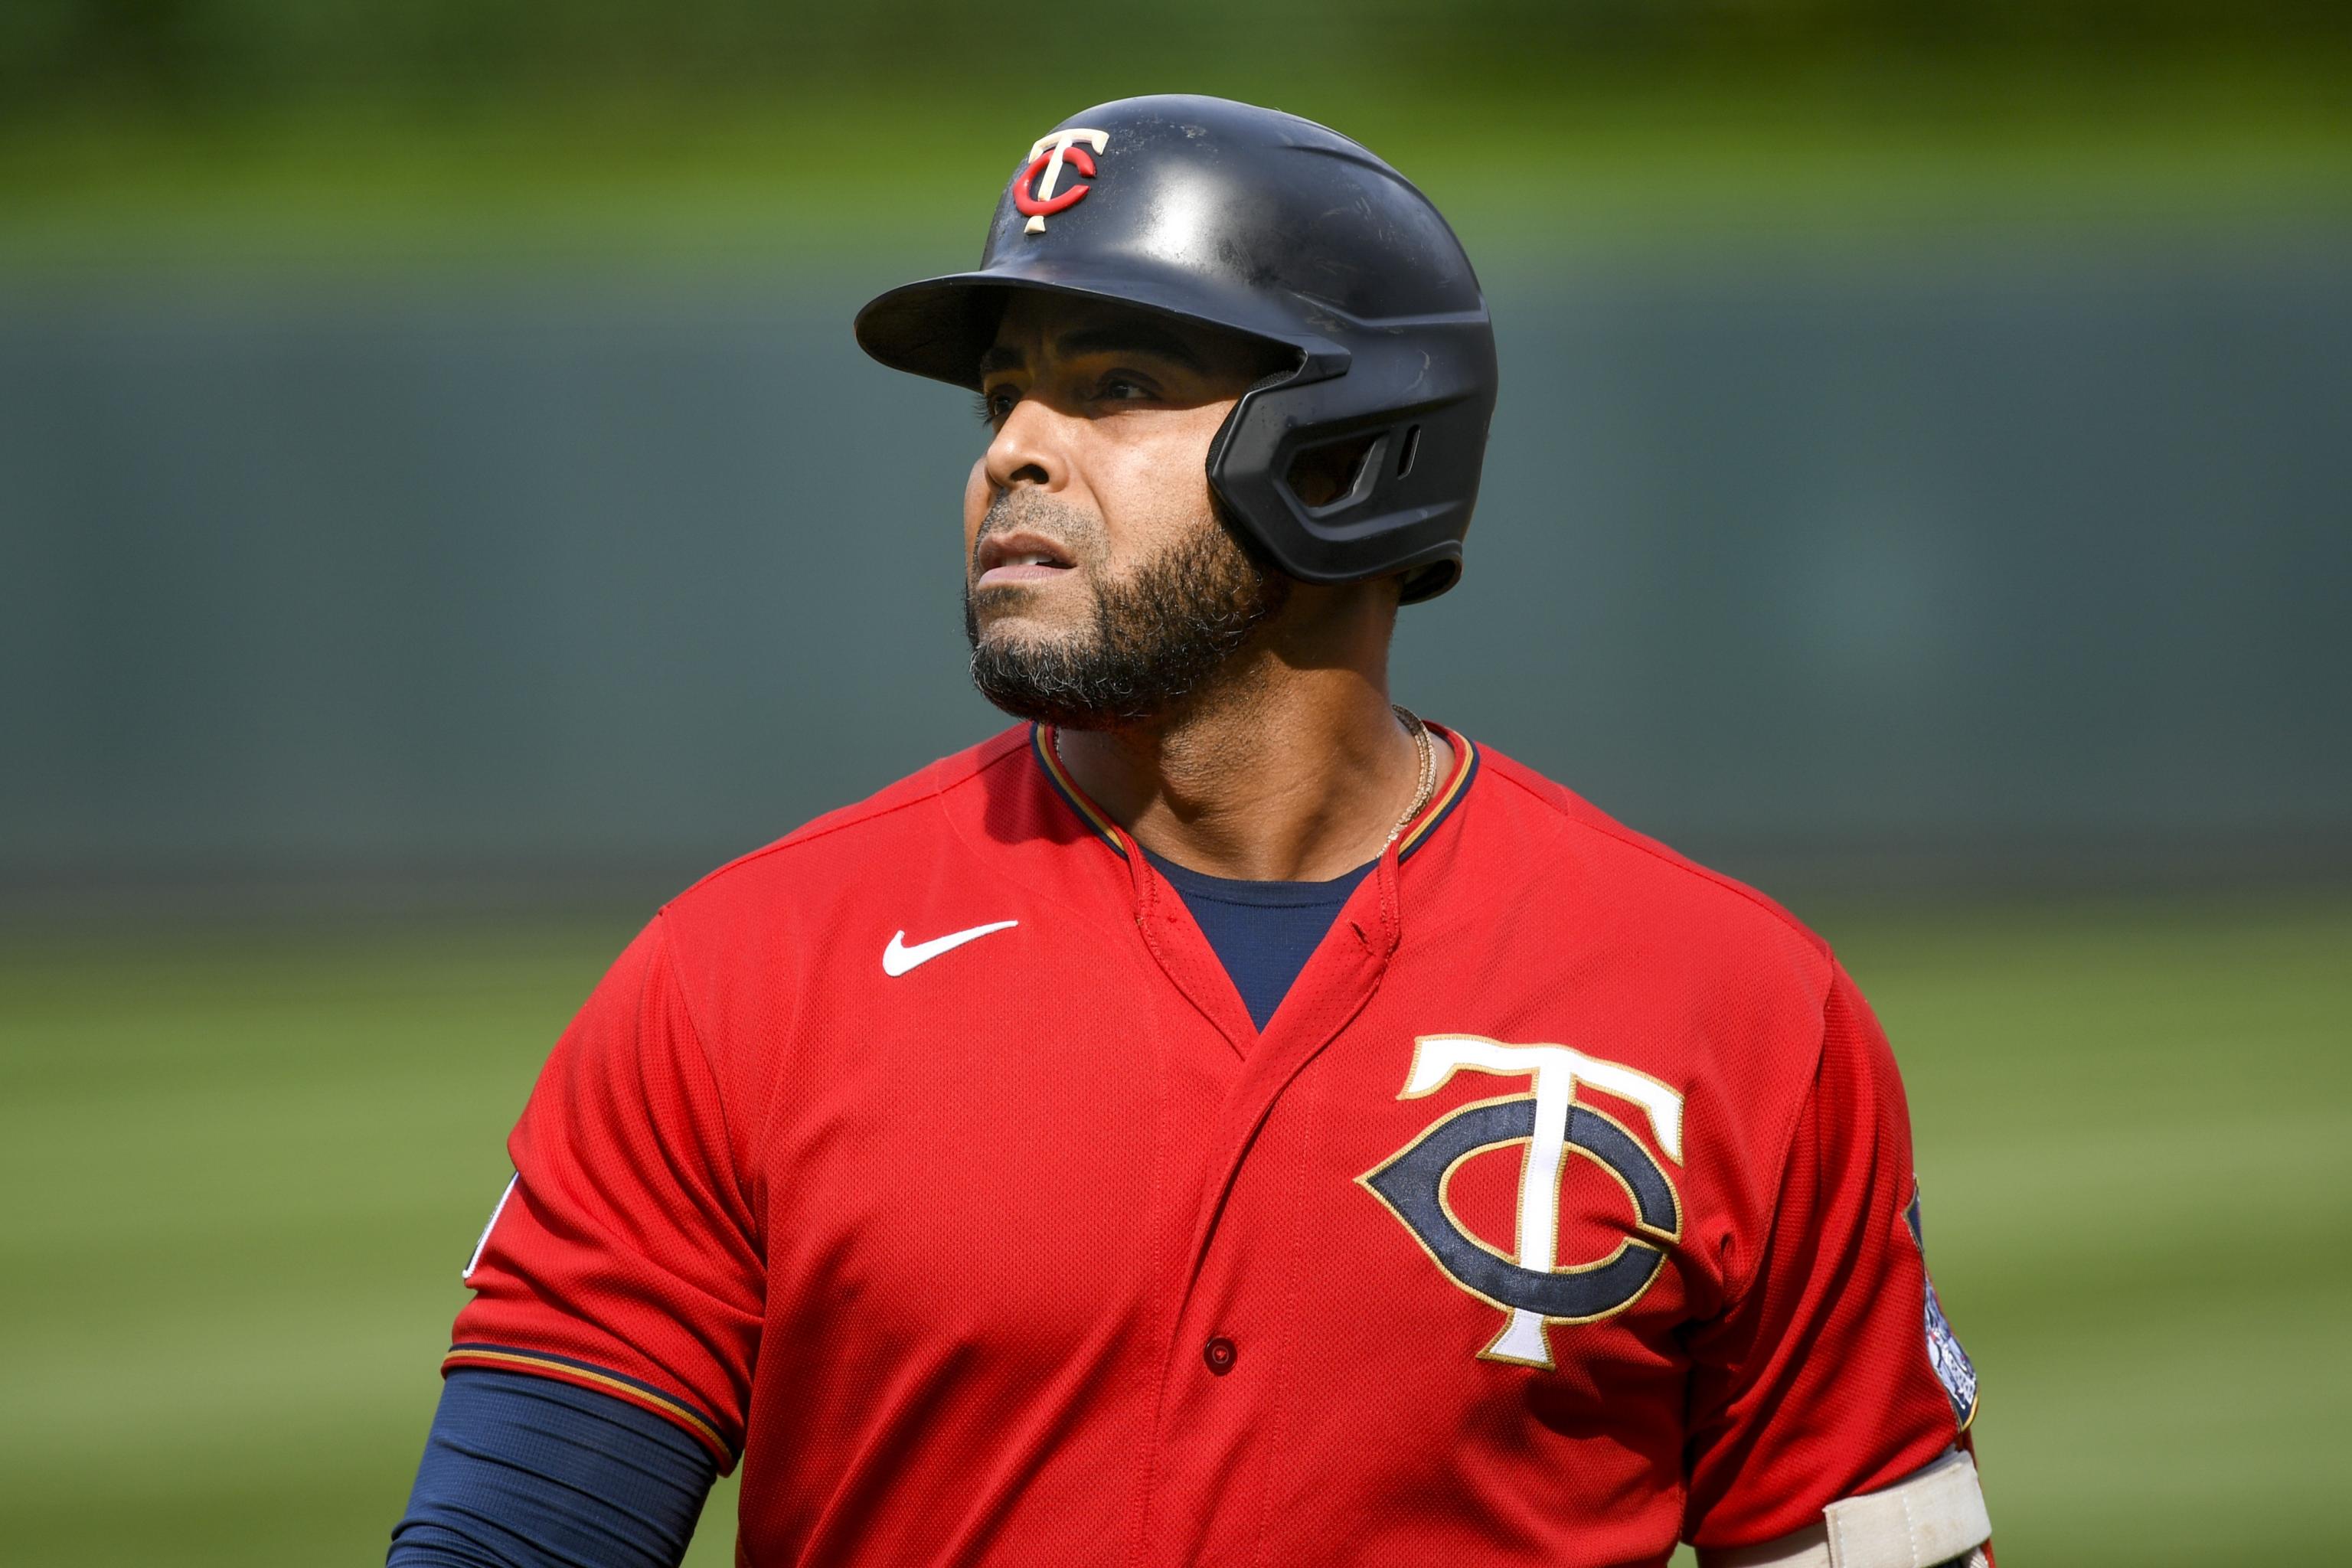 Nelson Cruz Traded from Twins to Rays in 4-Player Deal